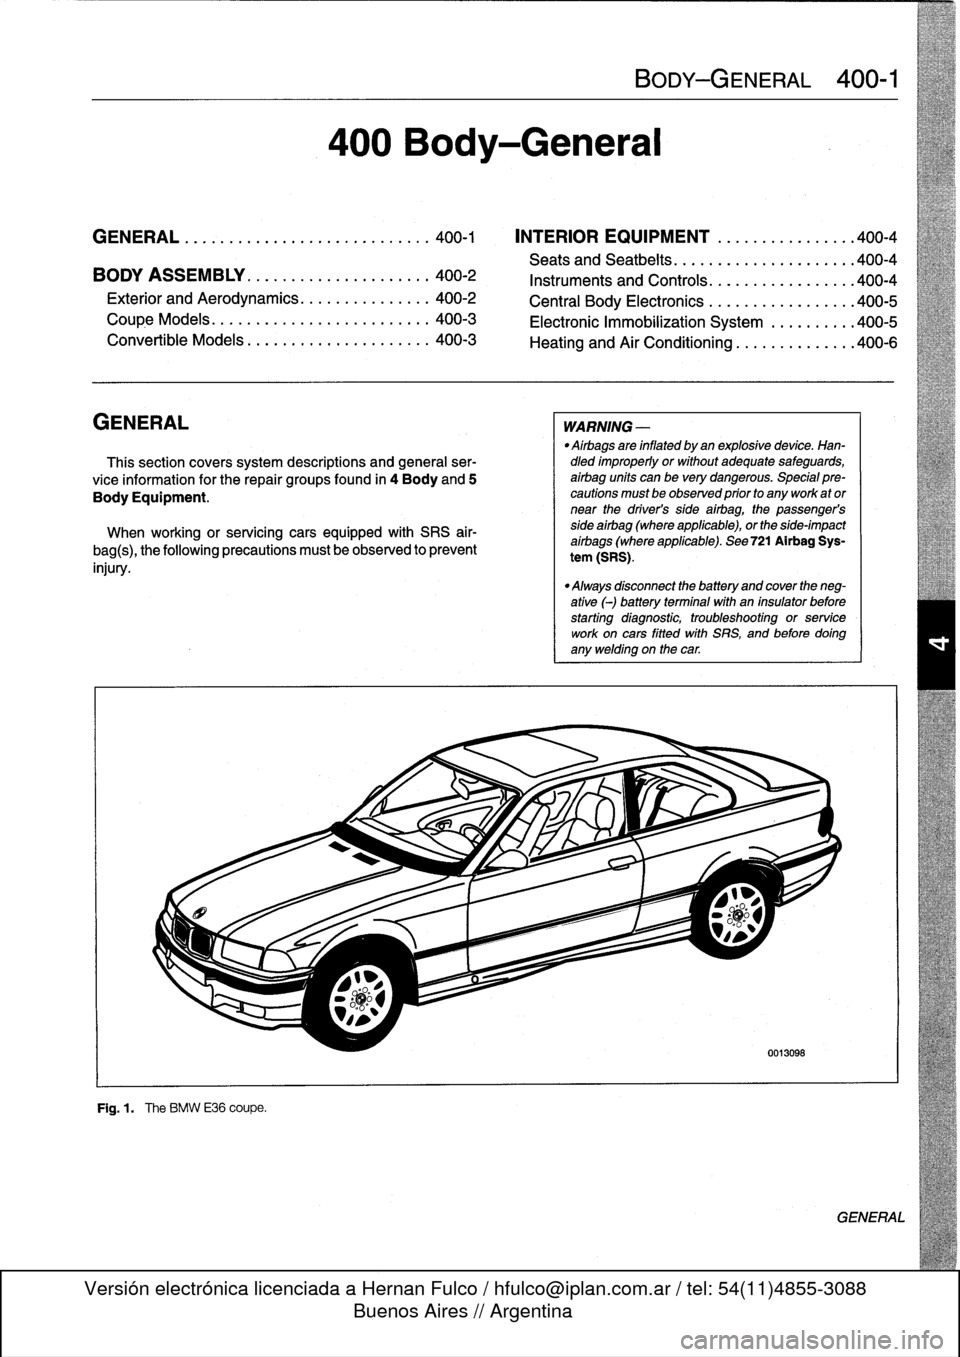 BMW 318i 1997 E36 Workshop Manual 
GENERAL
.
....
.
.
.
.
.
.......
.
.
.
.
.
...
.
.
.
400-1

	

INTERIOR
EQUIPMENT
......
.
.
.
.......
400-4
Seats
and
Seatbelts
.
.
.
.
.
.
.....
.
.
.
.
.
..
.
..
400-4
BODY
ASSEMBLY
.
.
.
.
.
....